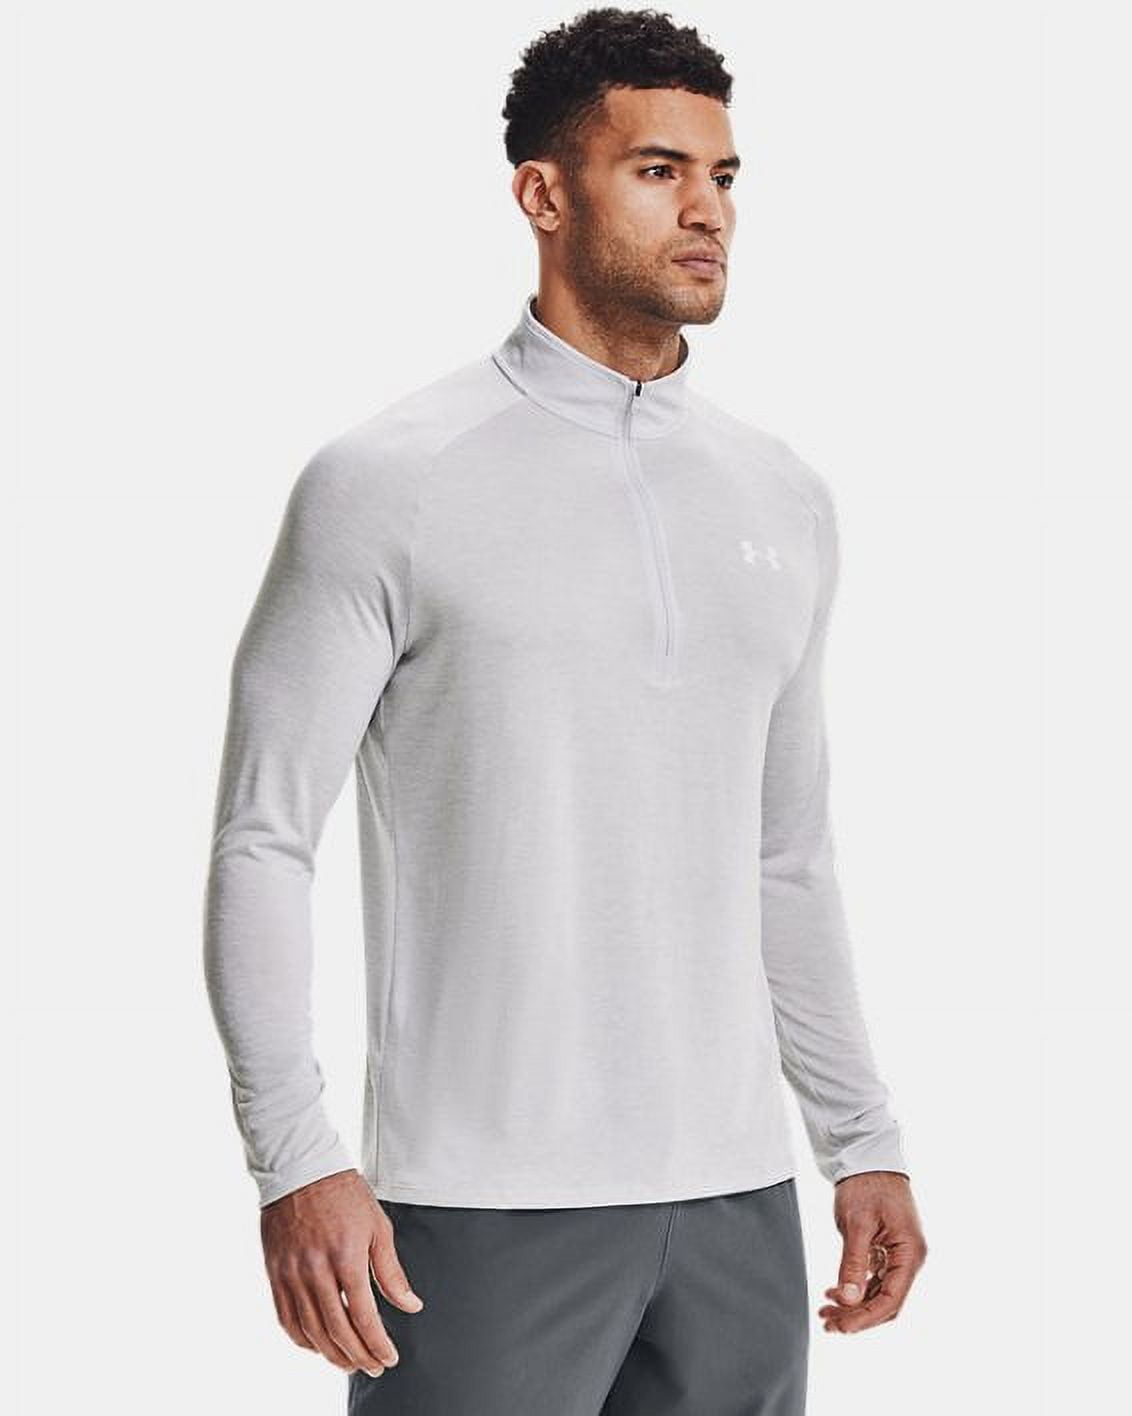 Under Armour mens Tech 2.0 1/2 Zip-Up, Academy (408)/Steel, Large